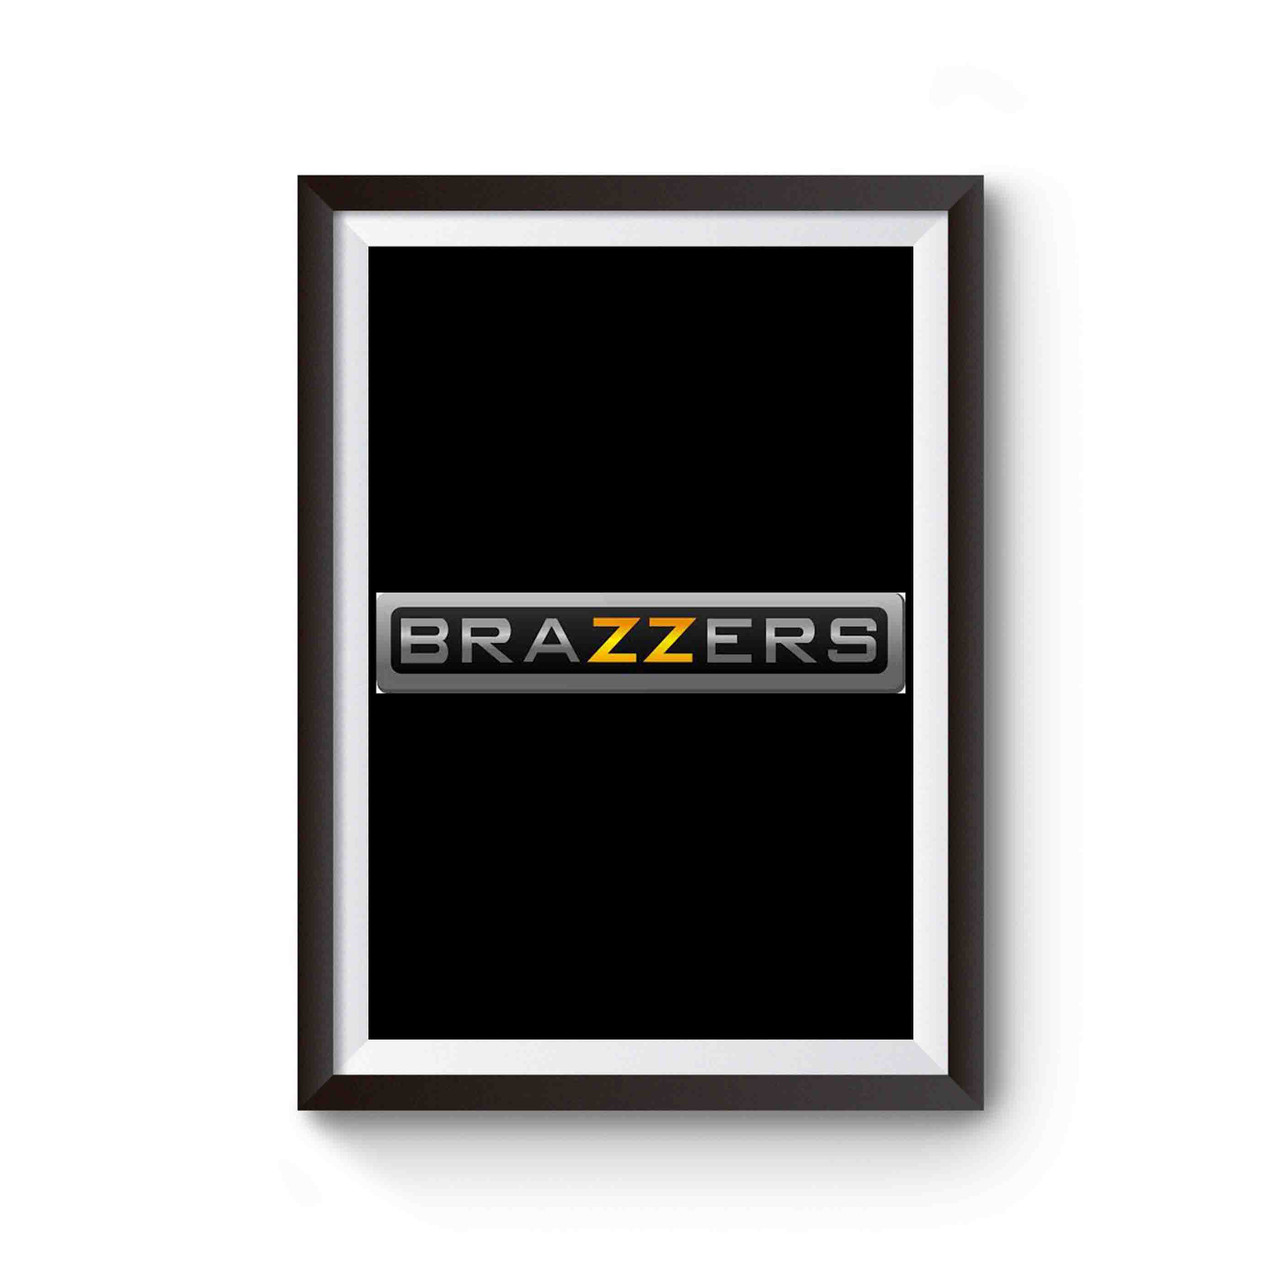 Barzzars Co In - Brazzers Funny Cool Porn Industry Poster